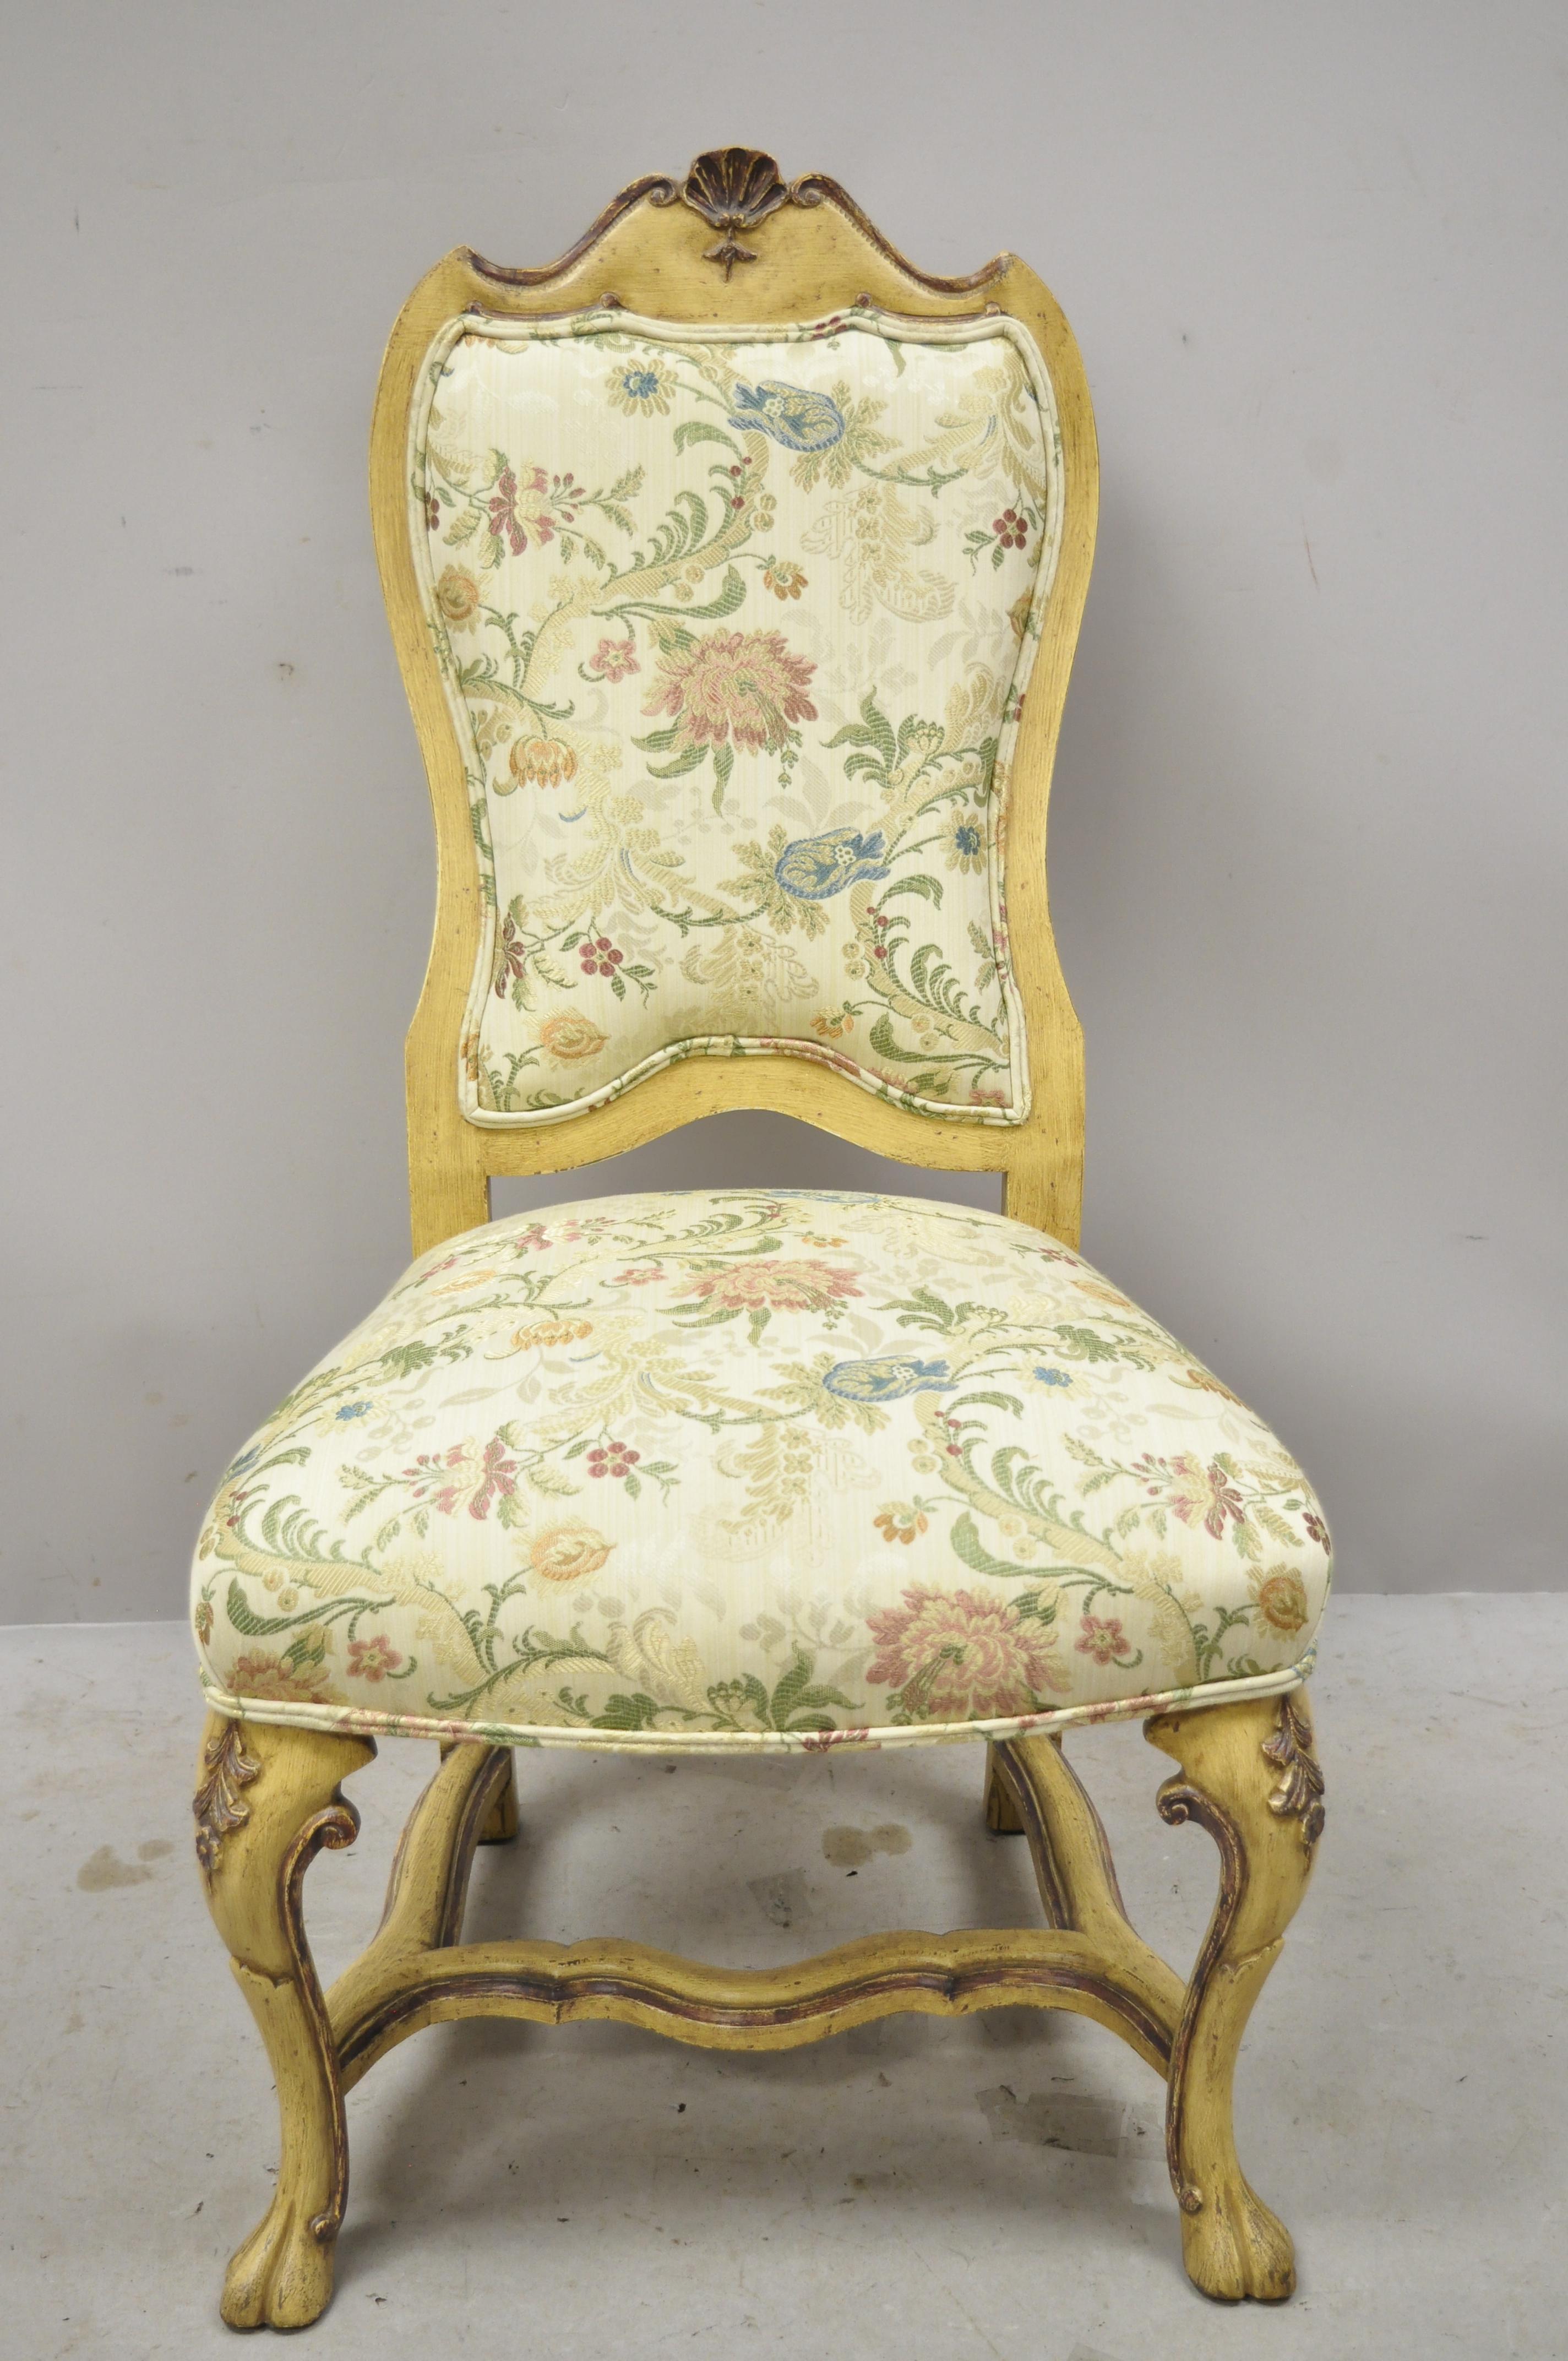 Minton-Spidell Italian Regency Rococo cream painted dining chairs - Set of 4. Item features (4) Side chairs, cream distress painted finish, solid wood frame, nicely carved details, original label, quality American craftsmanship, great style and